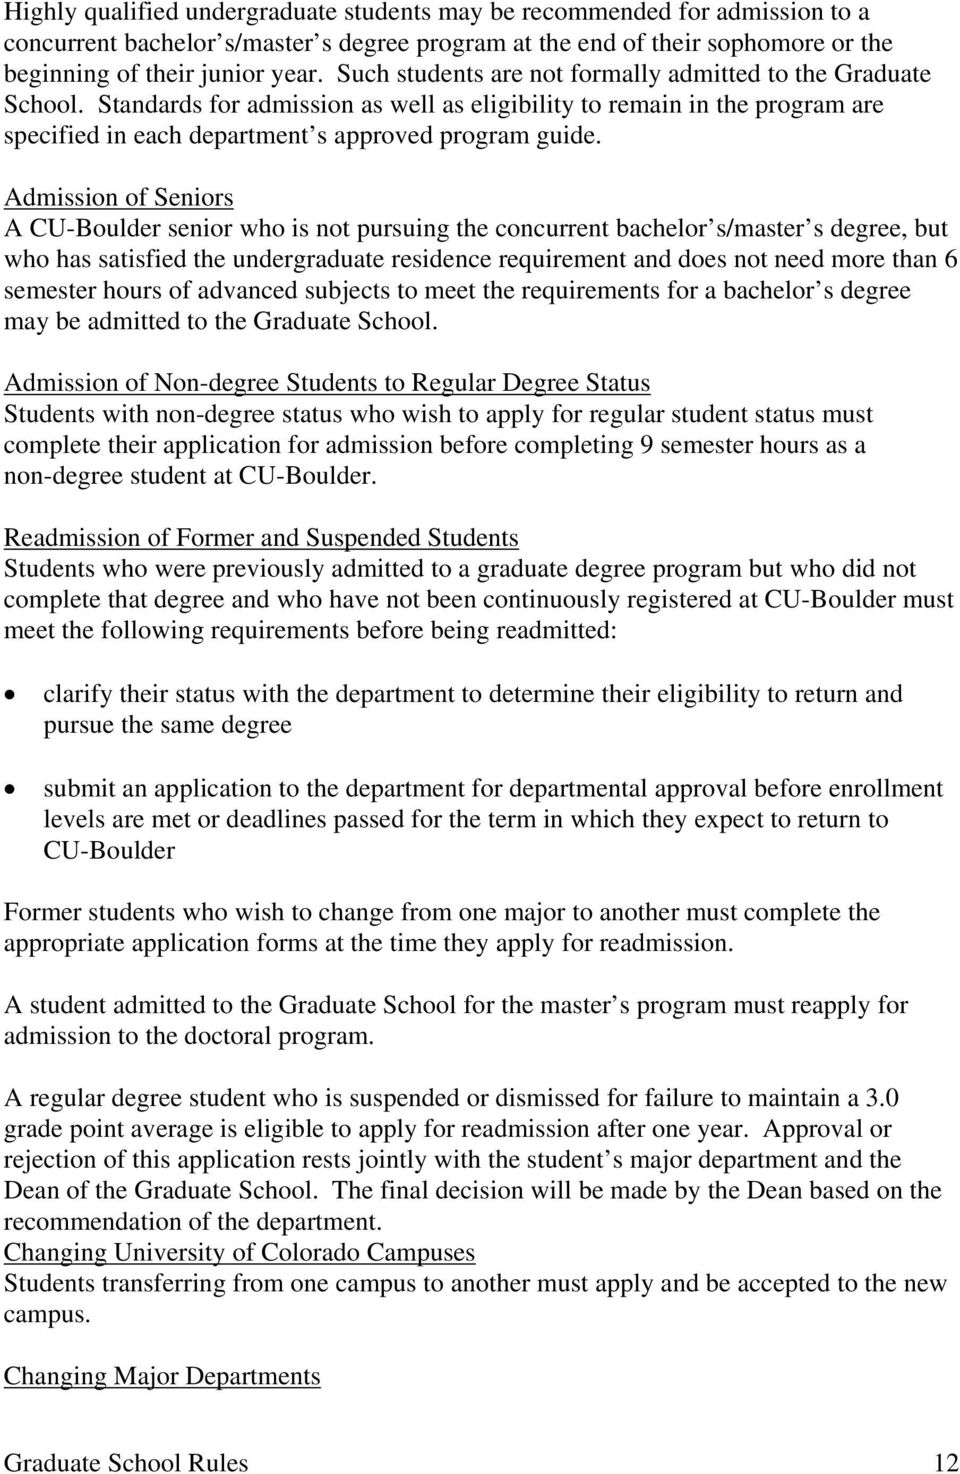 Admission of Seniors A CU-Boulder senior who is not pursuing the concurrent bachelor s/master s degree, but who has satisfied the undergraduate residence requirement and does not need more than 6